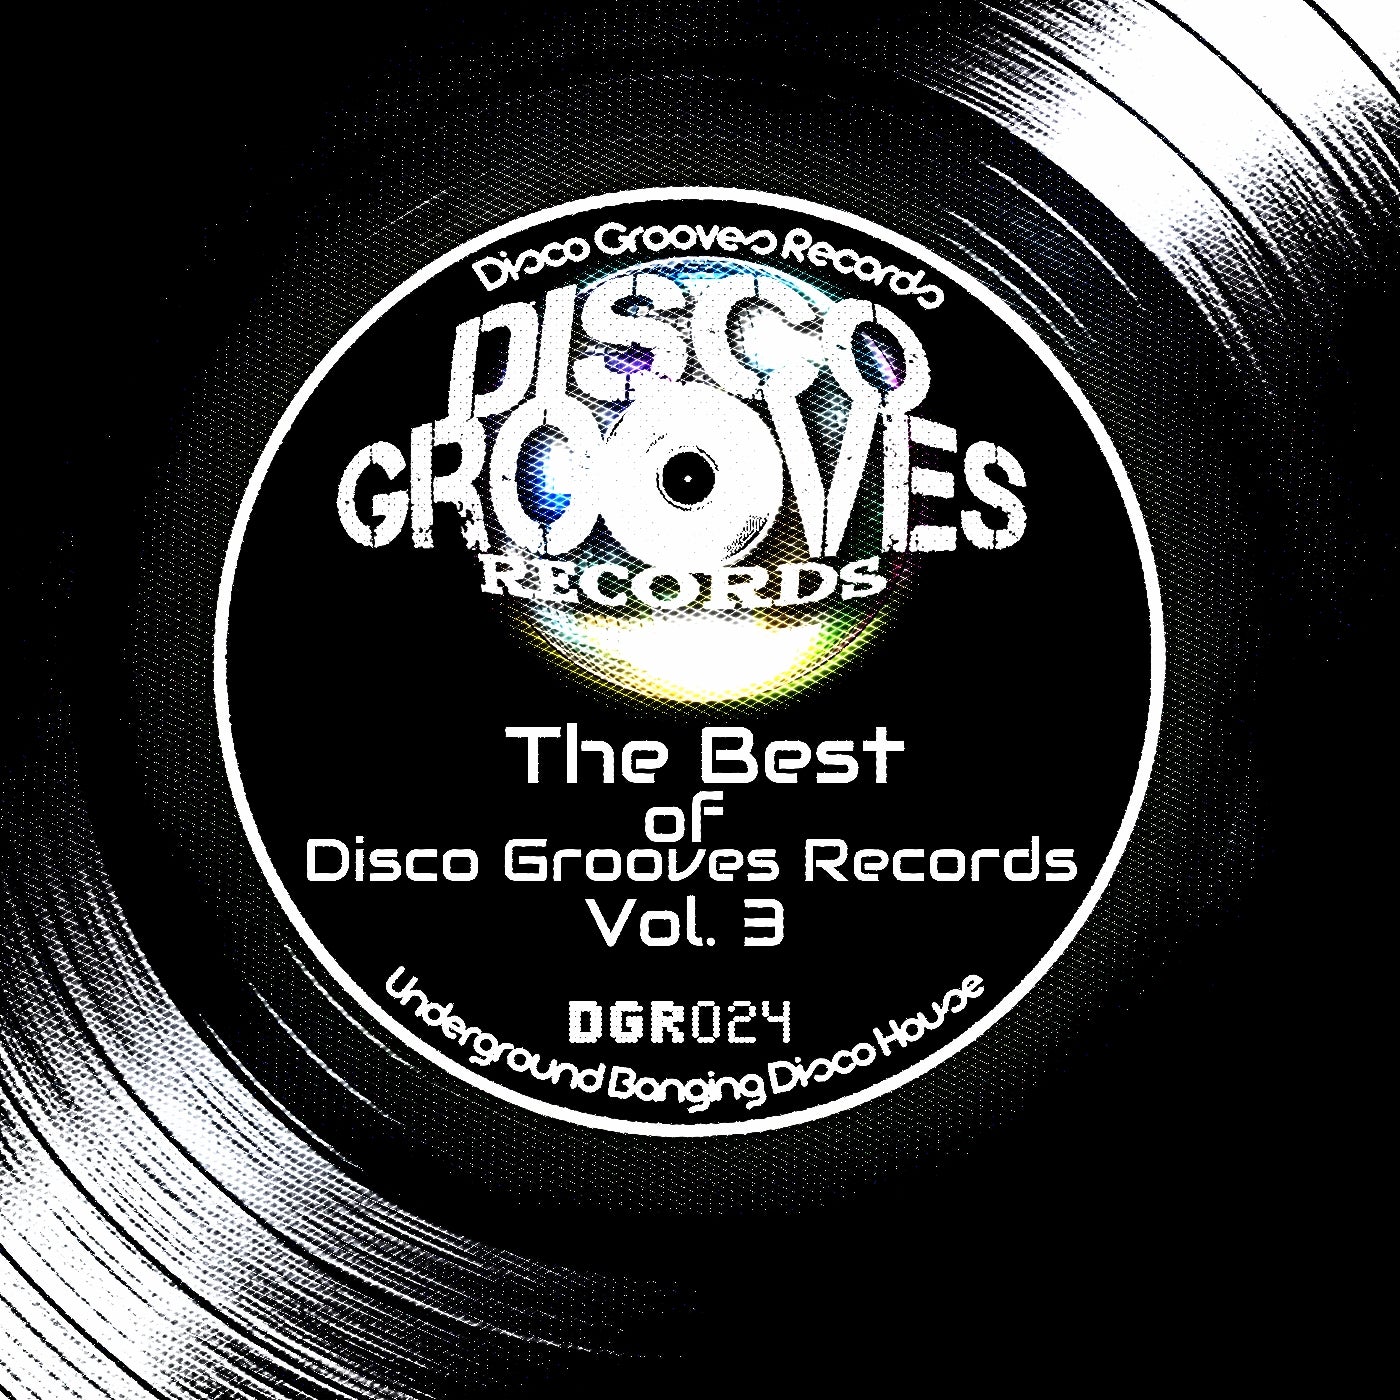 The Best of Disco Grooves Records, Vol. 3 DGR024 - deeptech.house